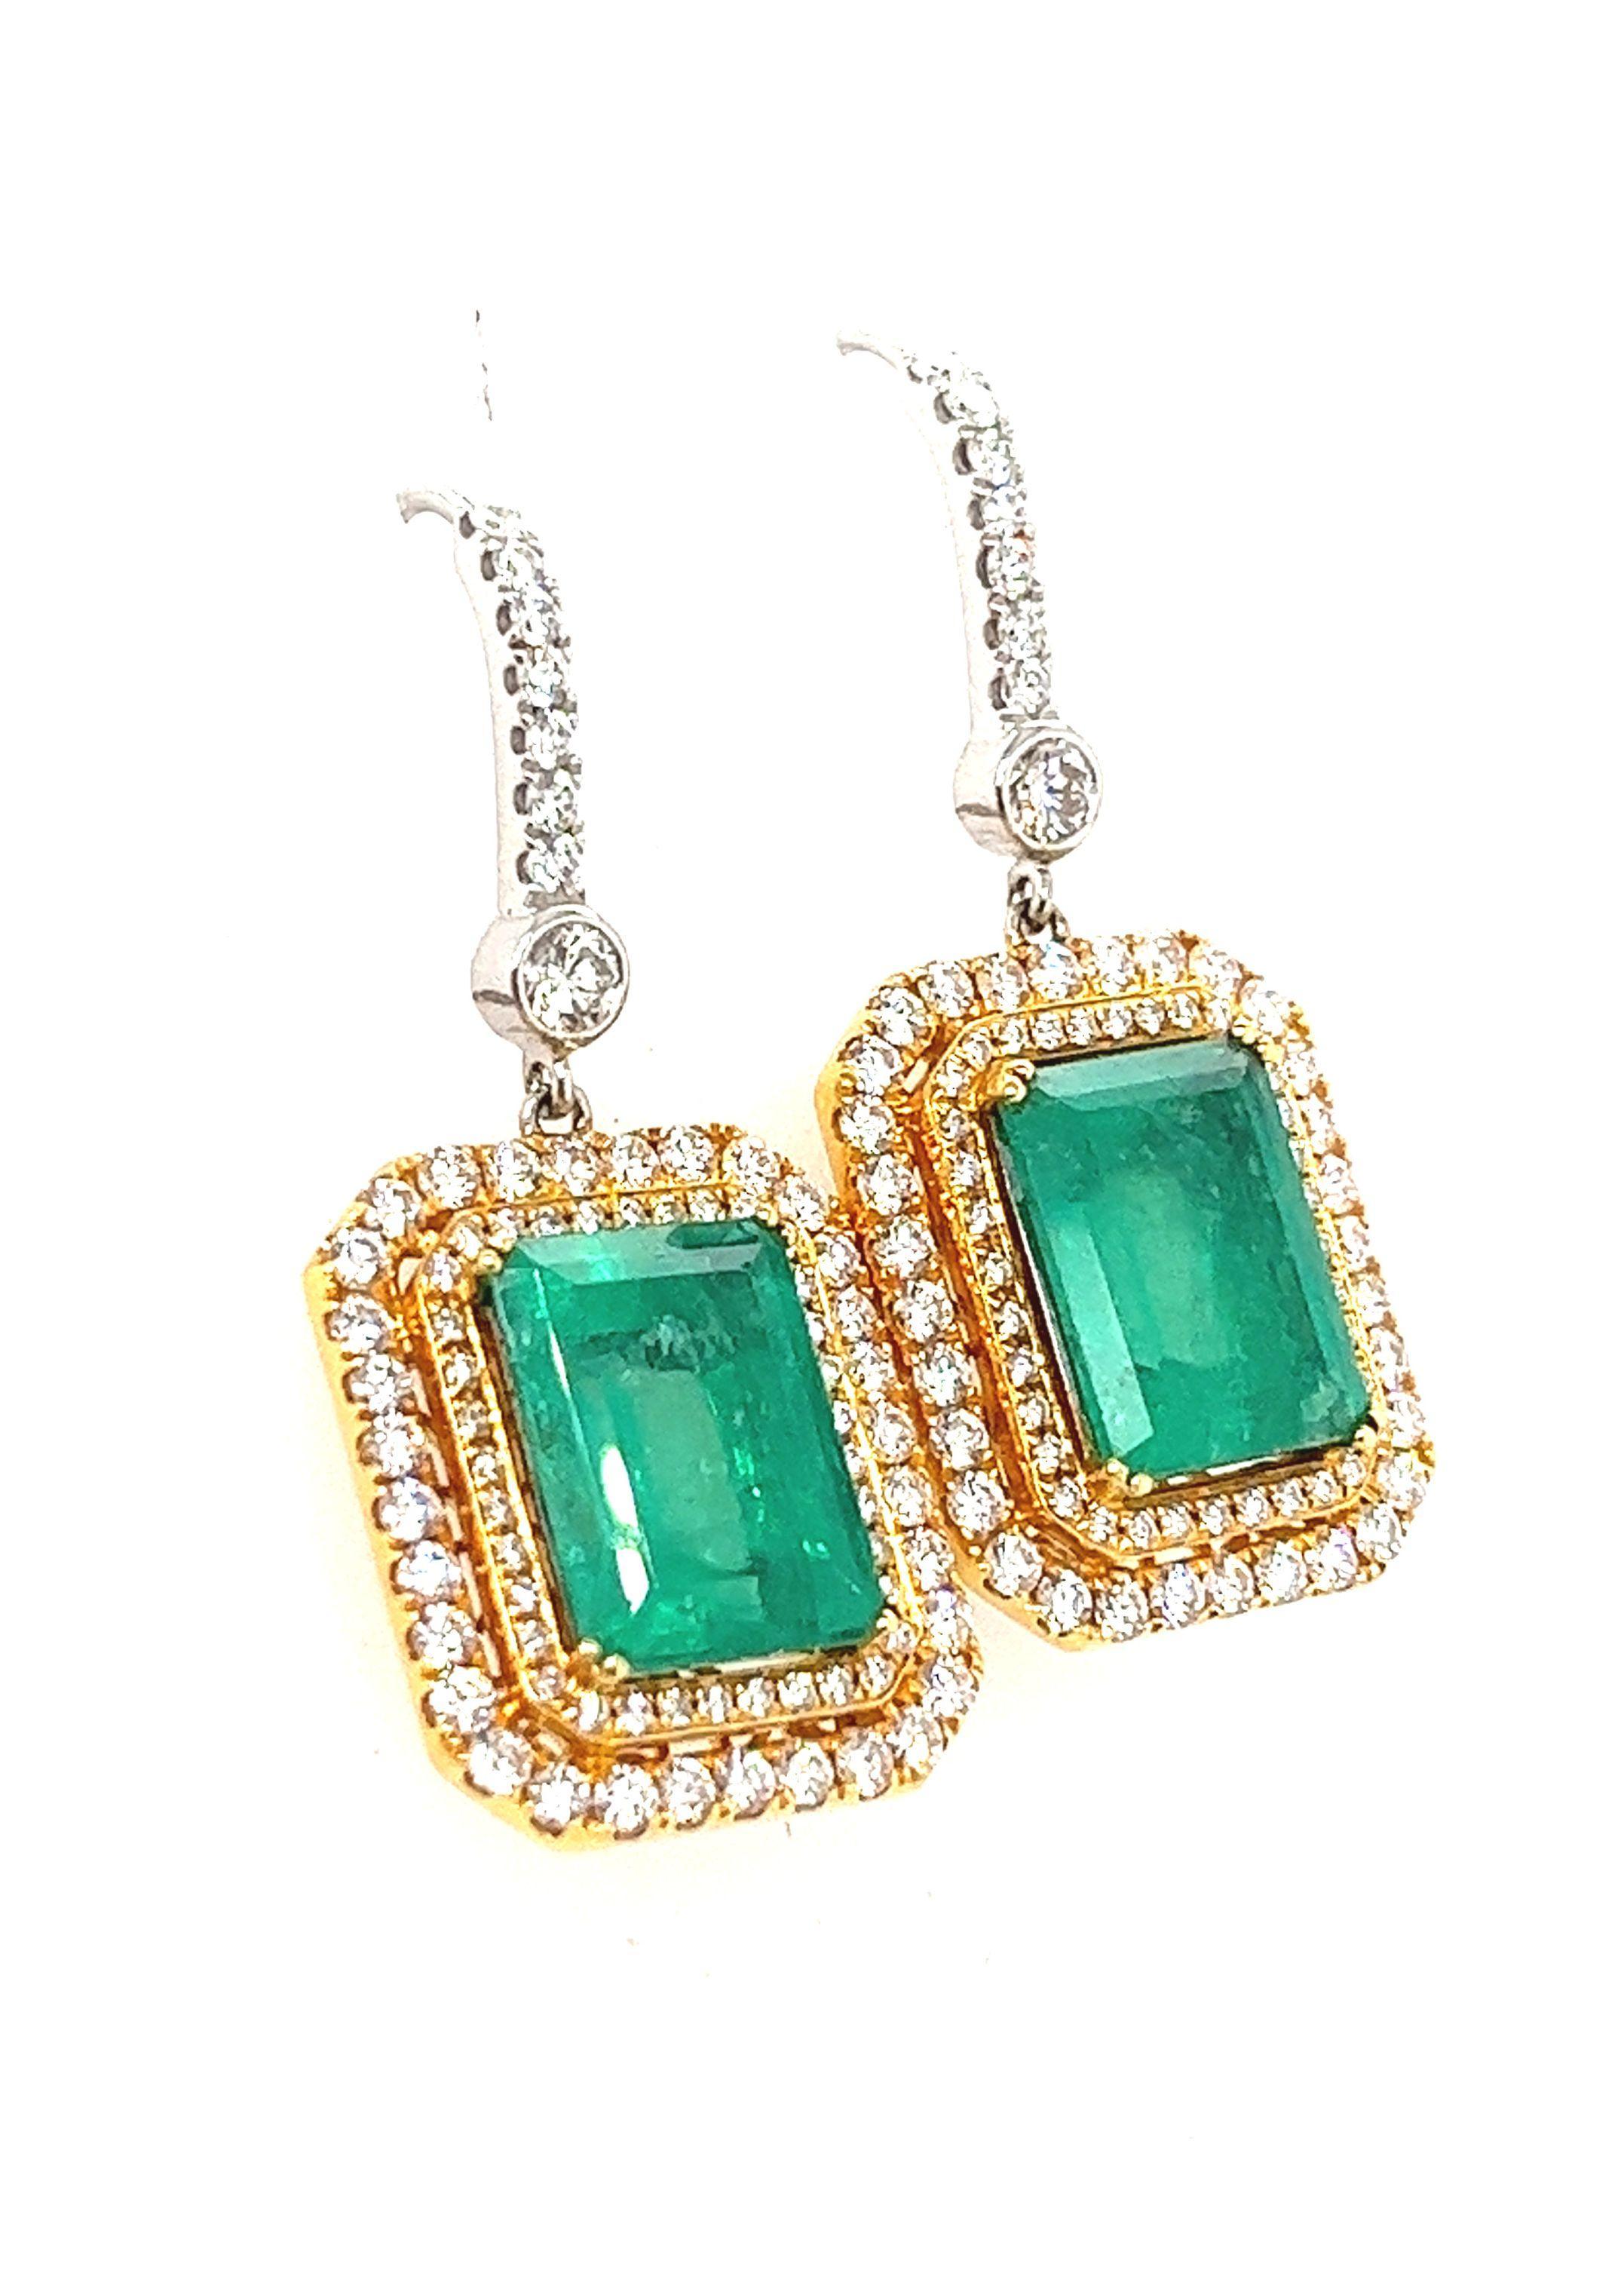 7.36 Carat Total Natural Colombian Emerald and Diamond Dangle Drop Earrings. 

Item Details:
- Type: Dangle Drop Earring 
- Metal: 18K White, Yellow Gold 
- Weight: 10.3 grams 
- Setting: Prong, Bezel  
- Drop Length: 1.4 inches